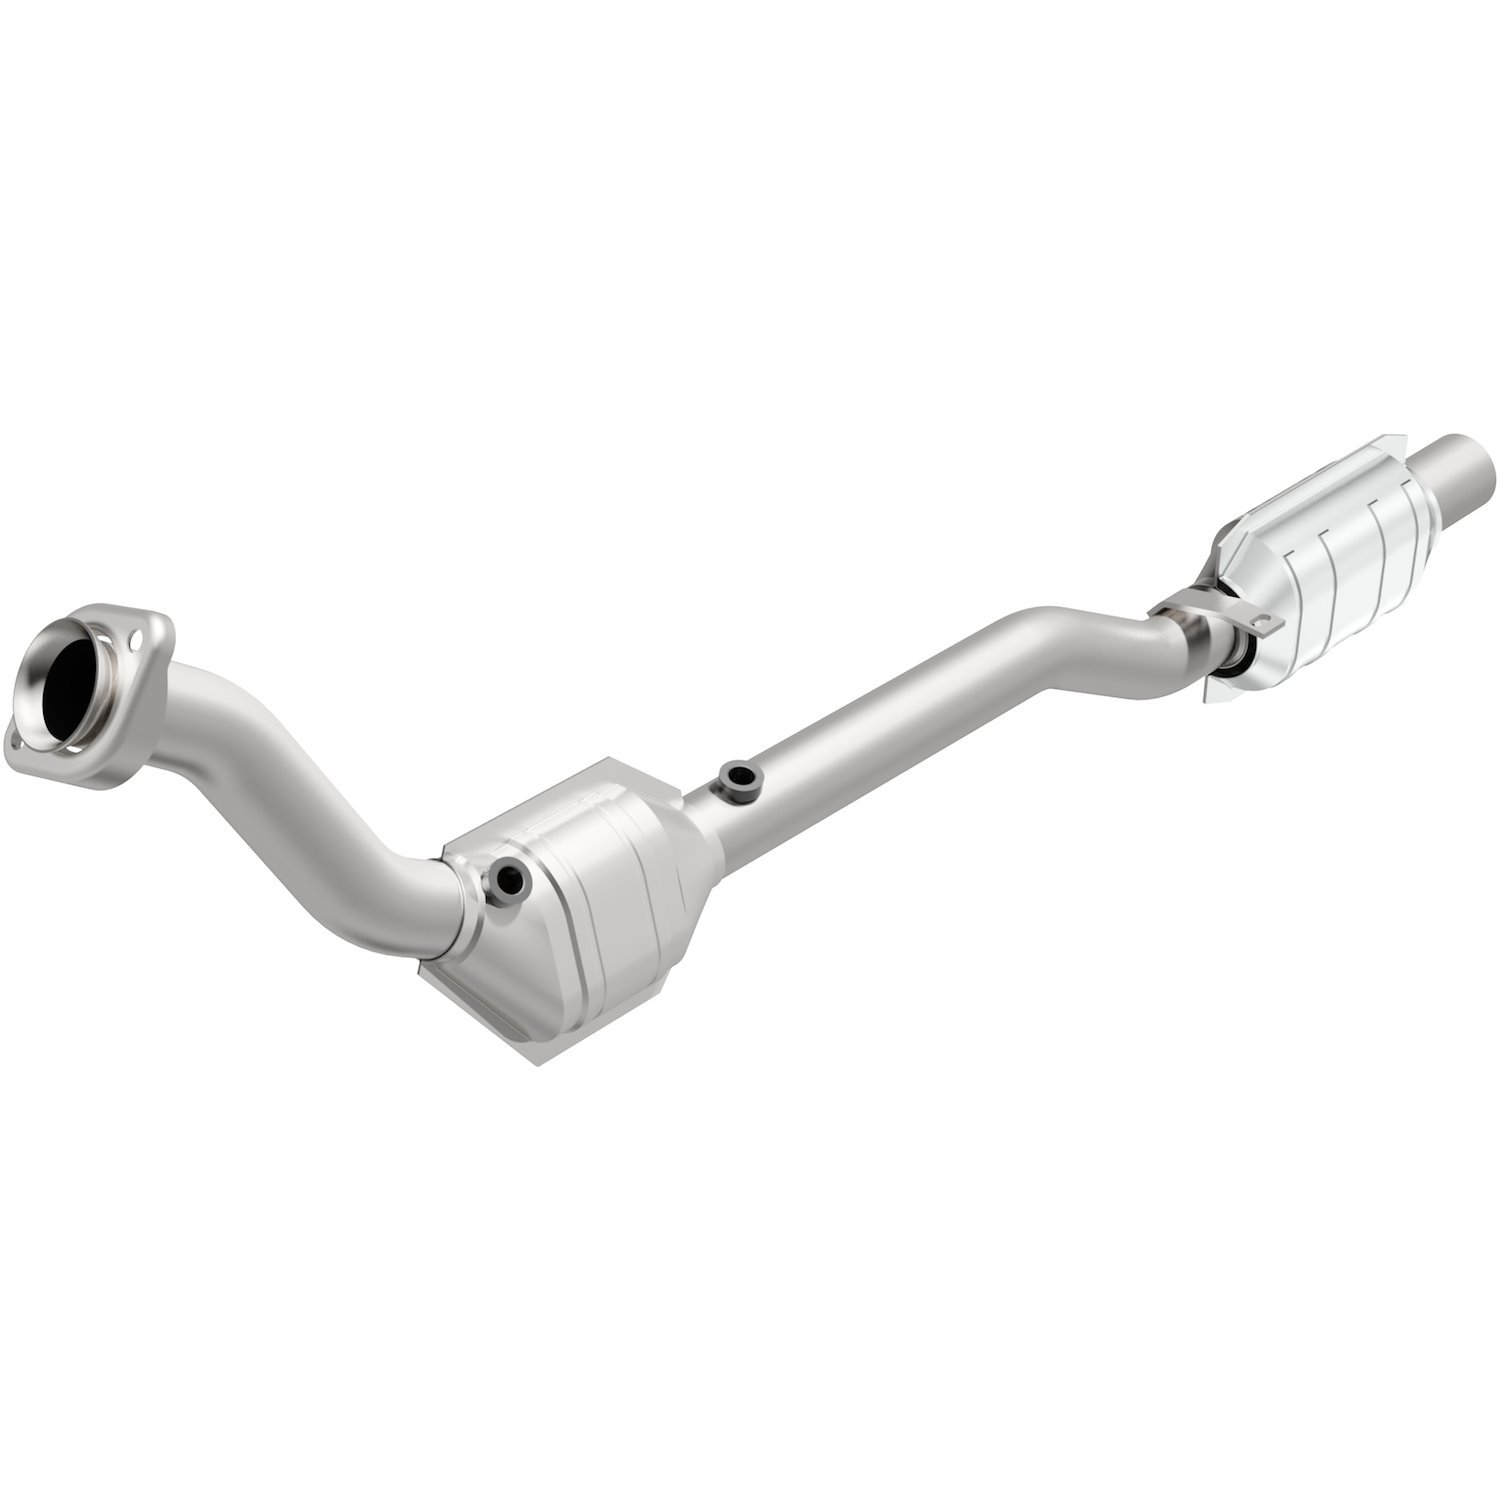 HM Grade Federal / EPA Compliant Direct-Fit Catalytic Converter 93106